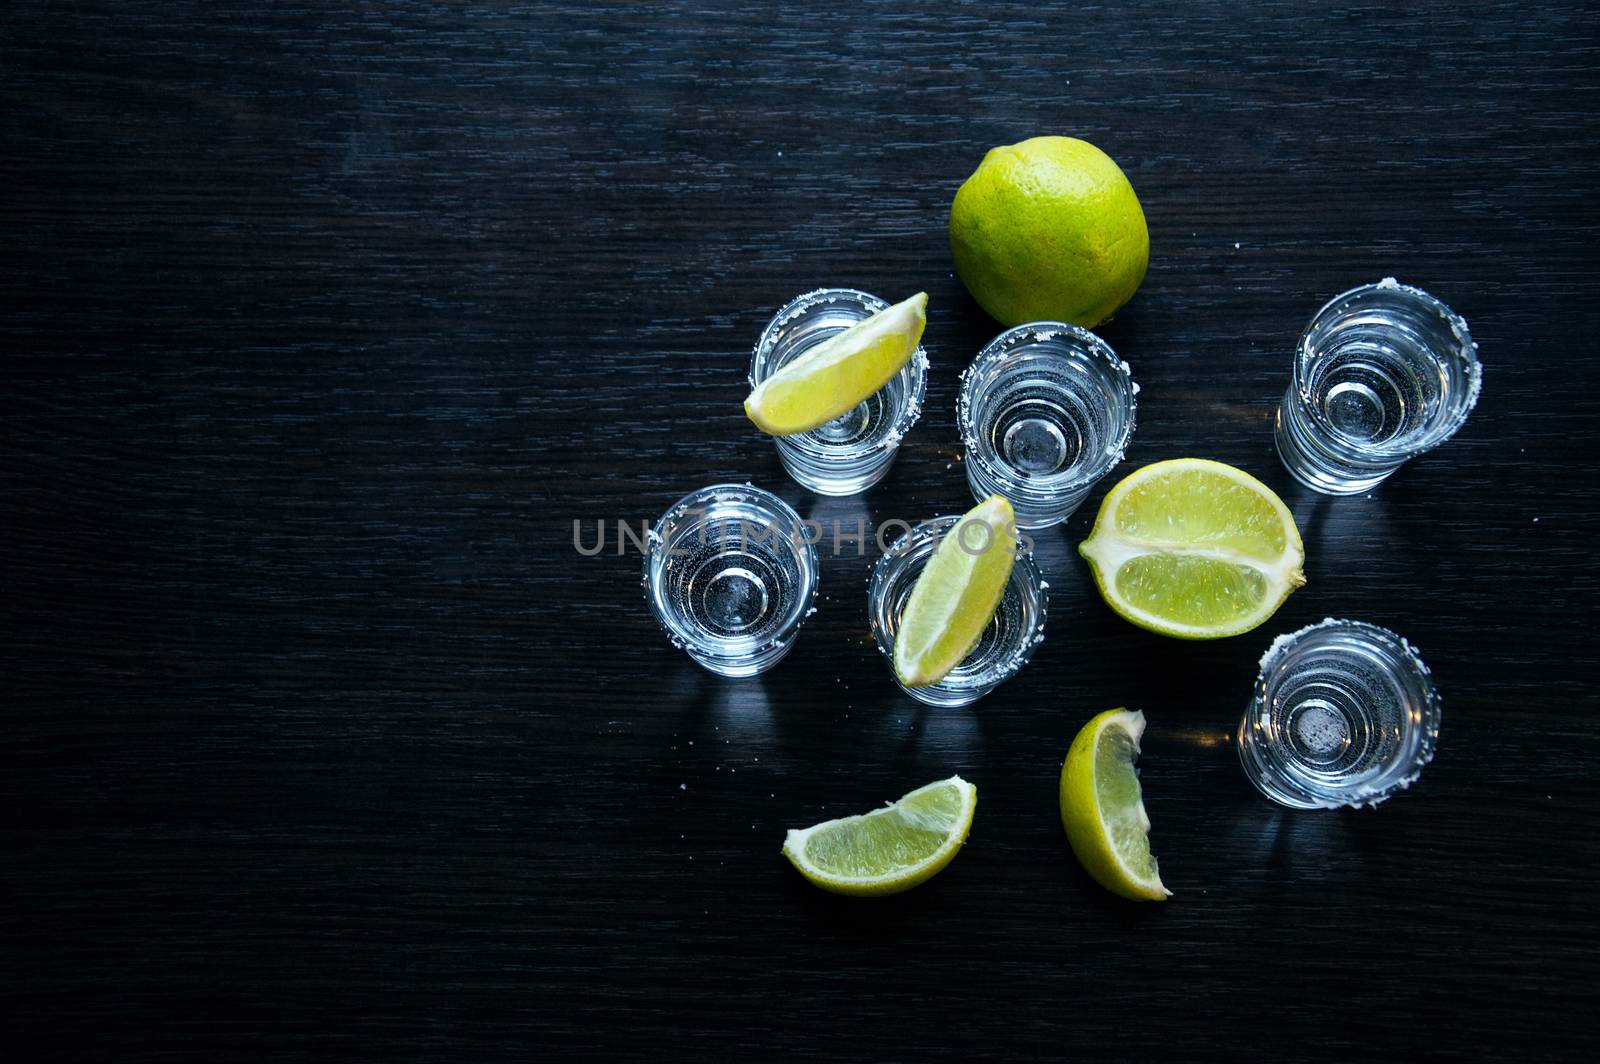 Silver tequila - Traditional Mexican drink by natali_brill